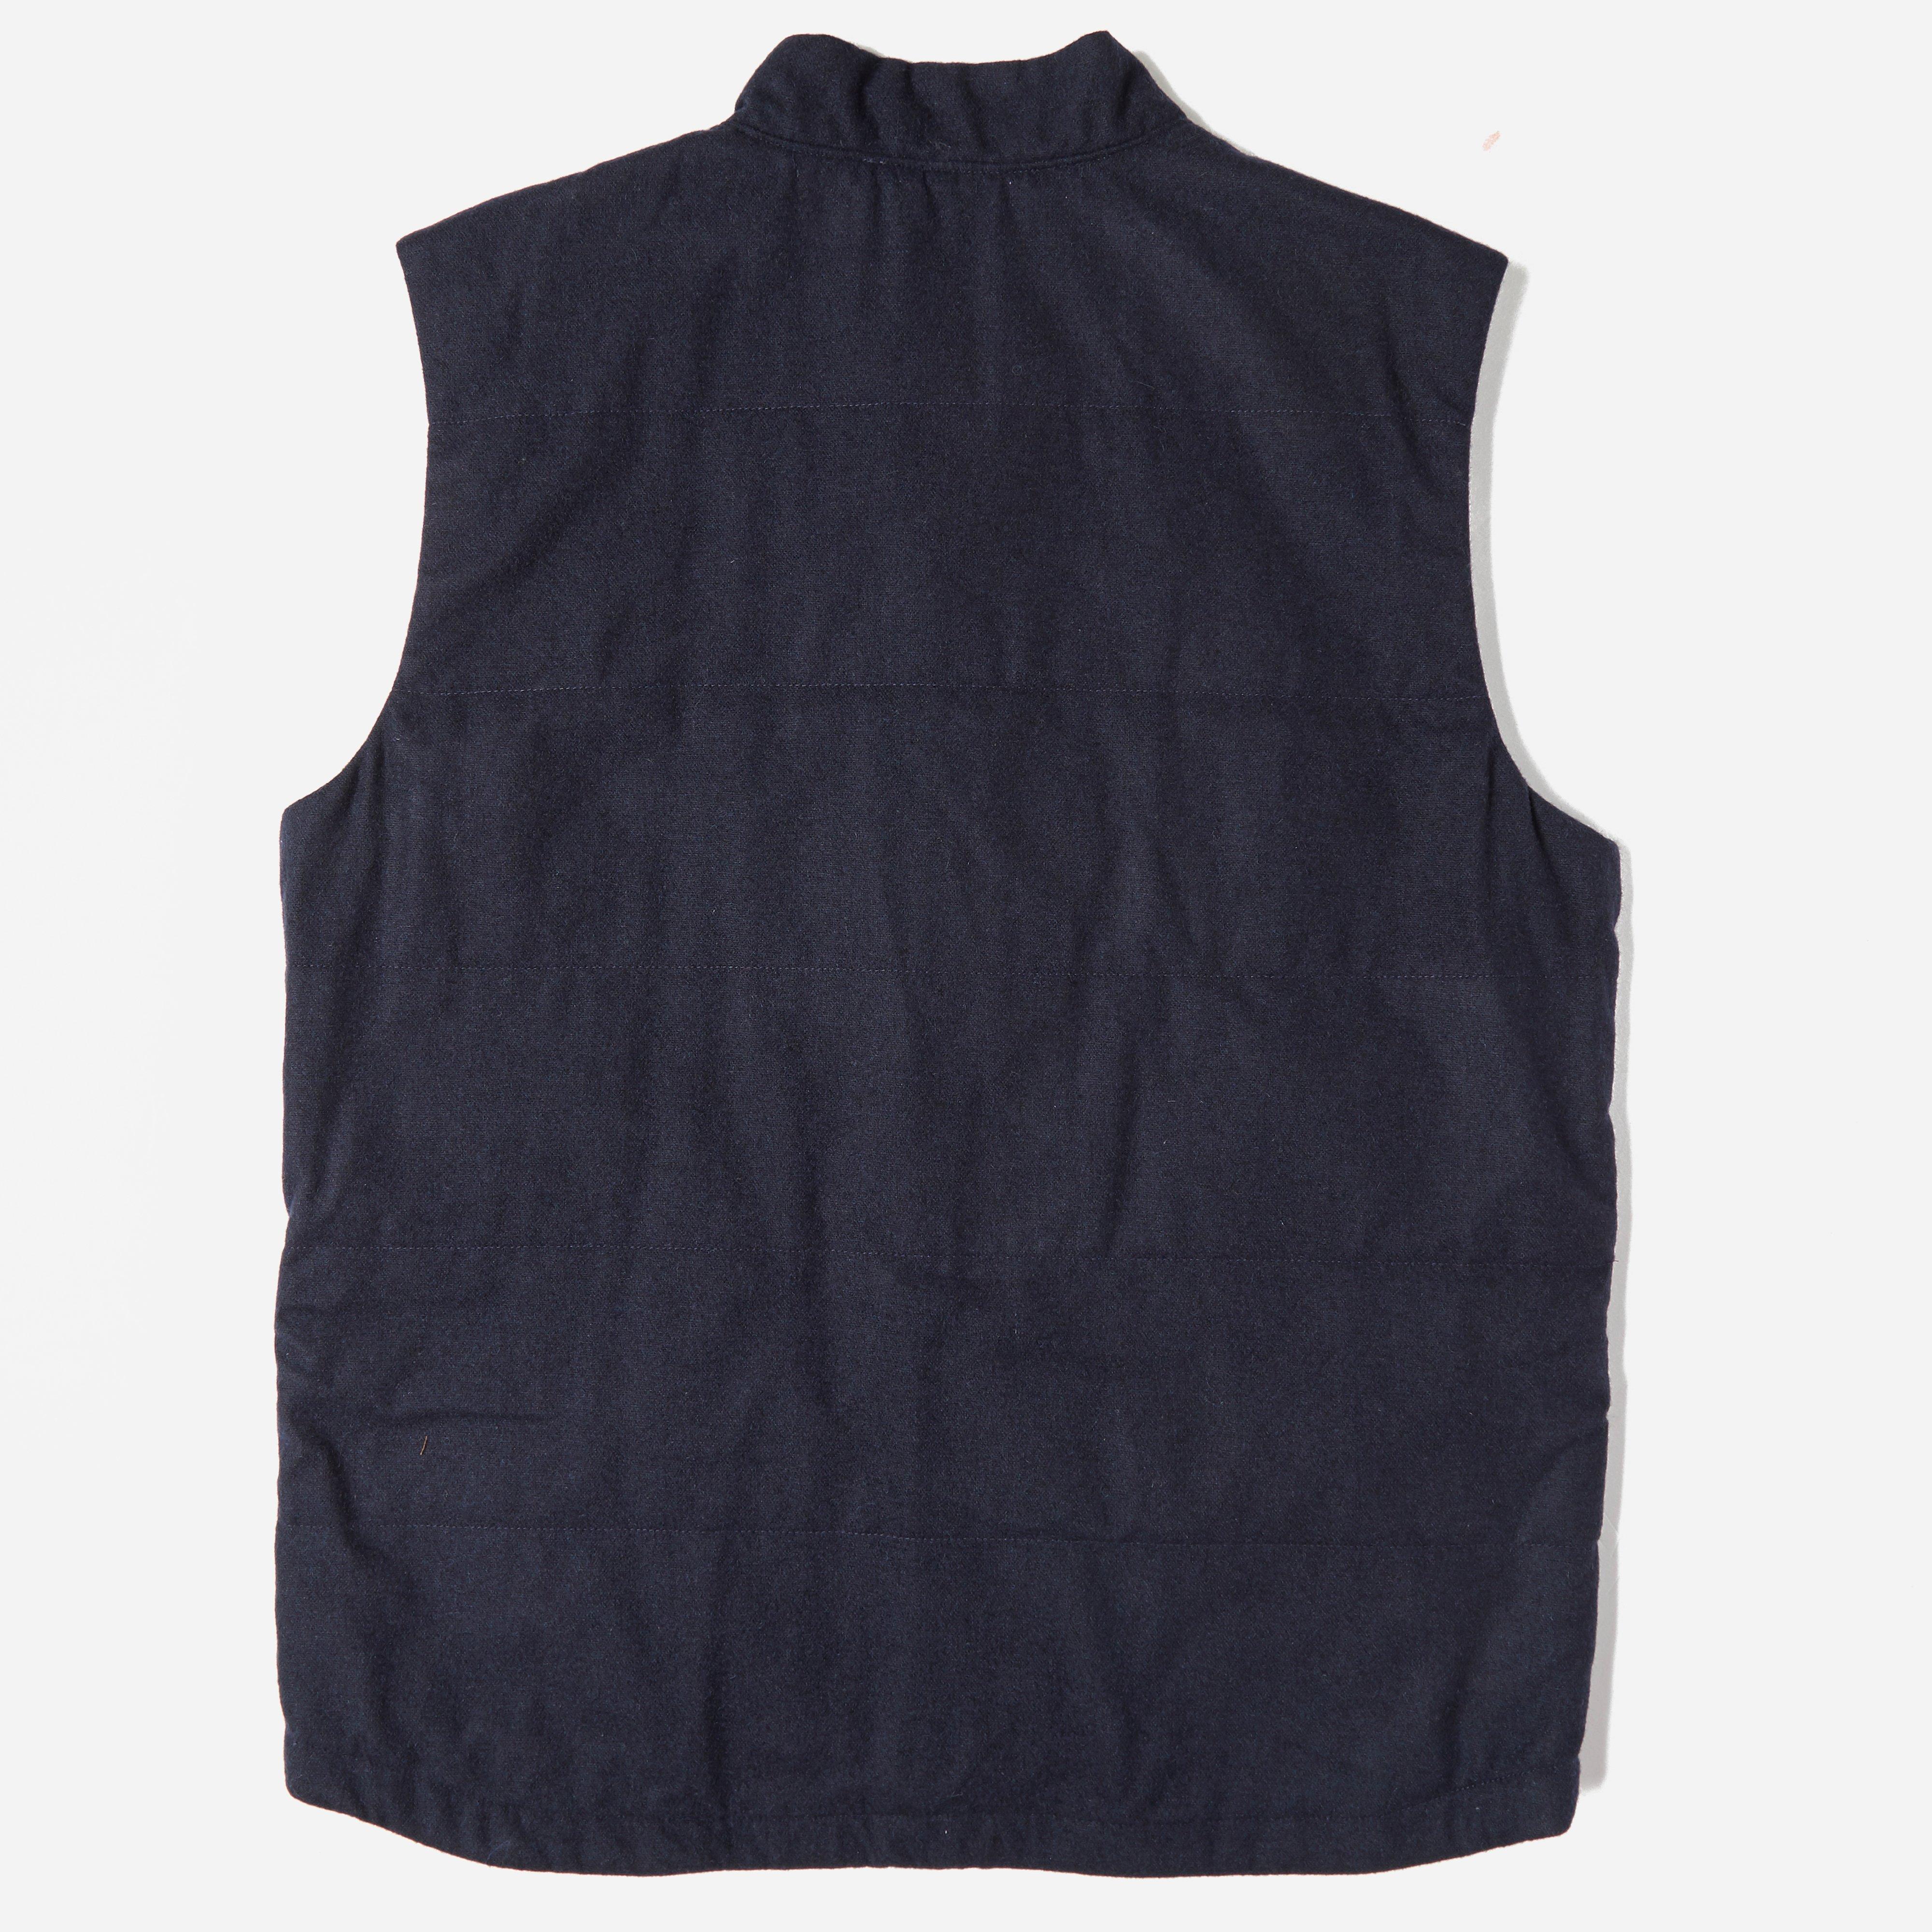 Patagonia Recycled Wool Vest in Blue for Men - Lyst